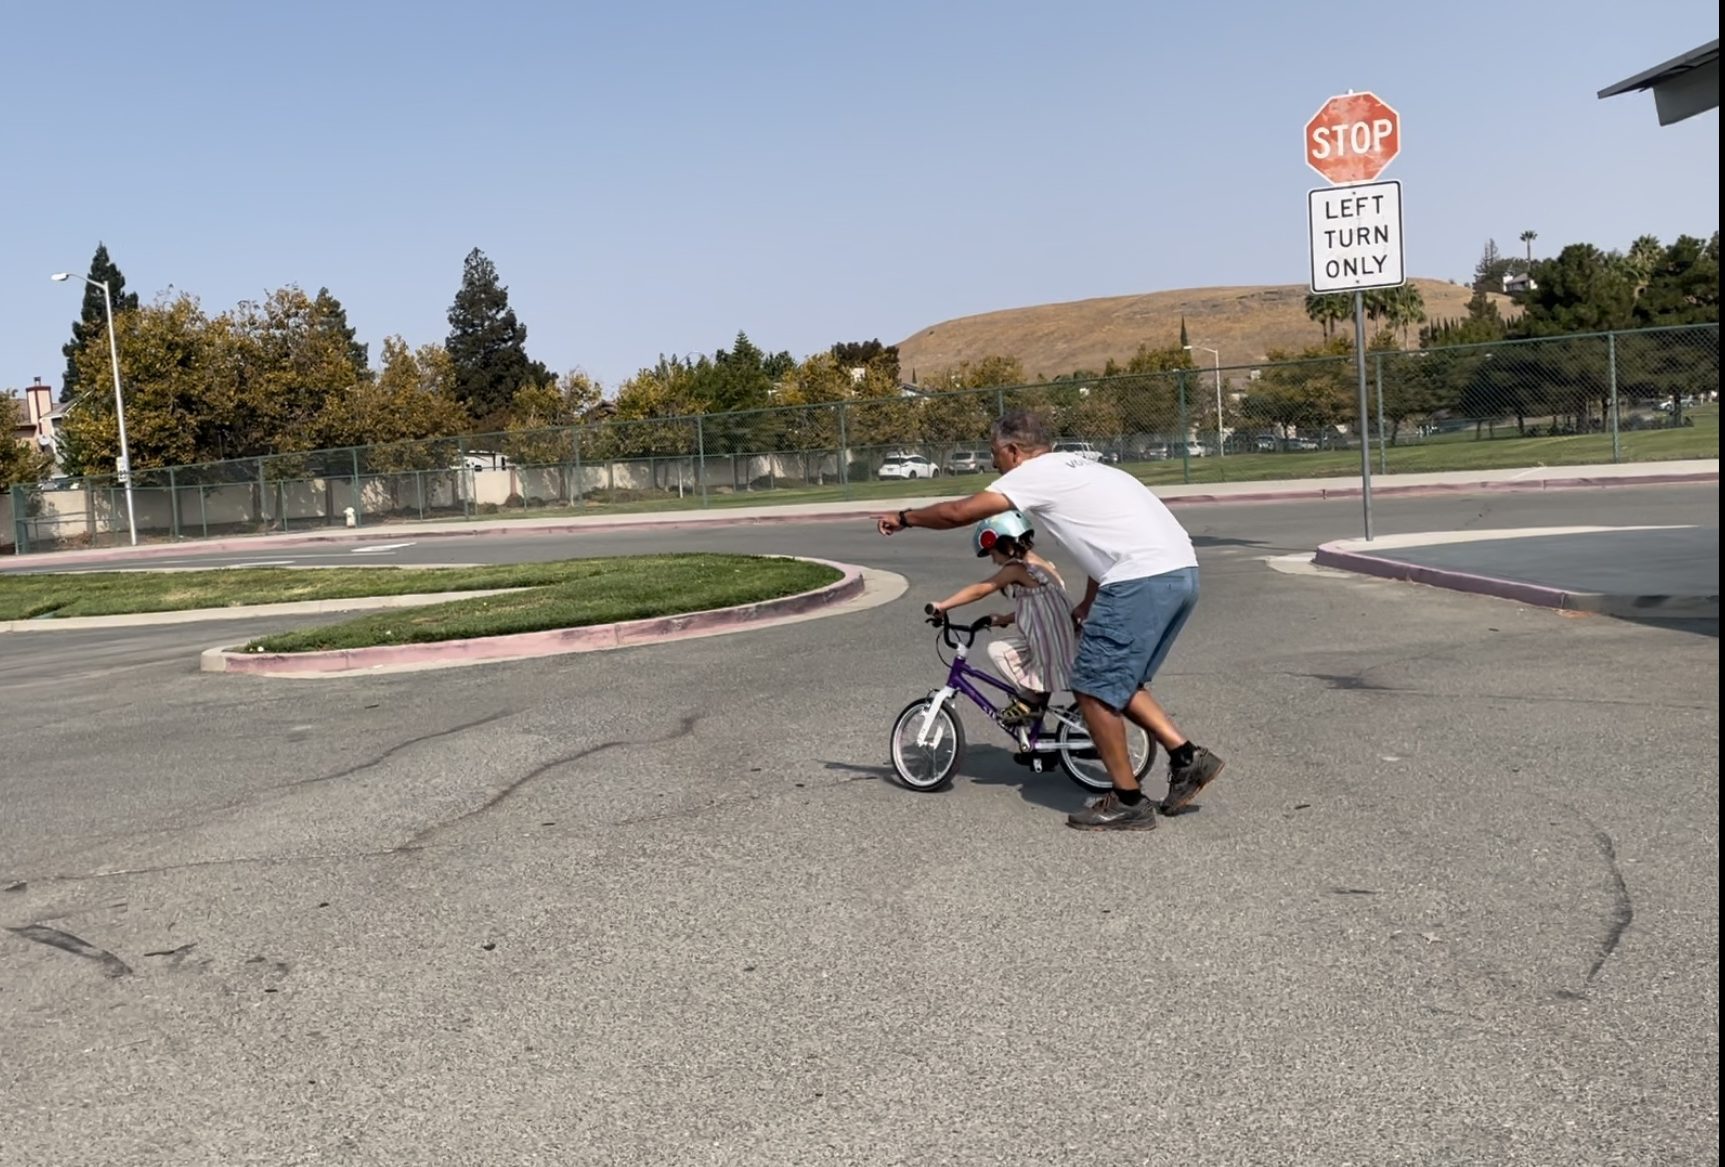 adult helping child ride a bike in a parking lot